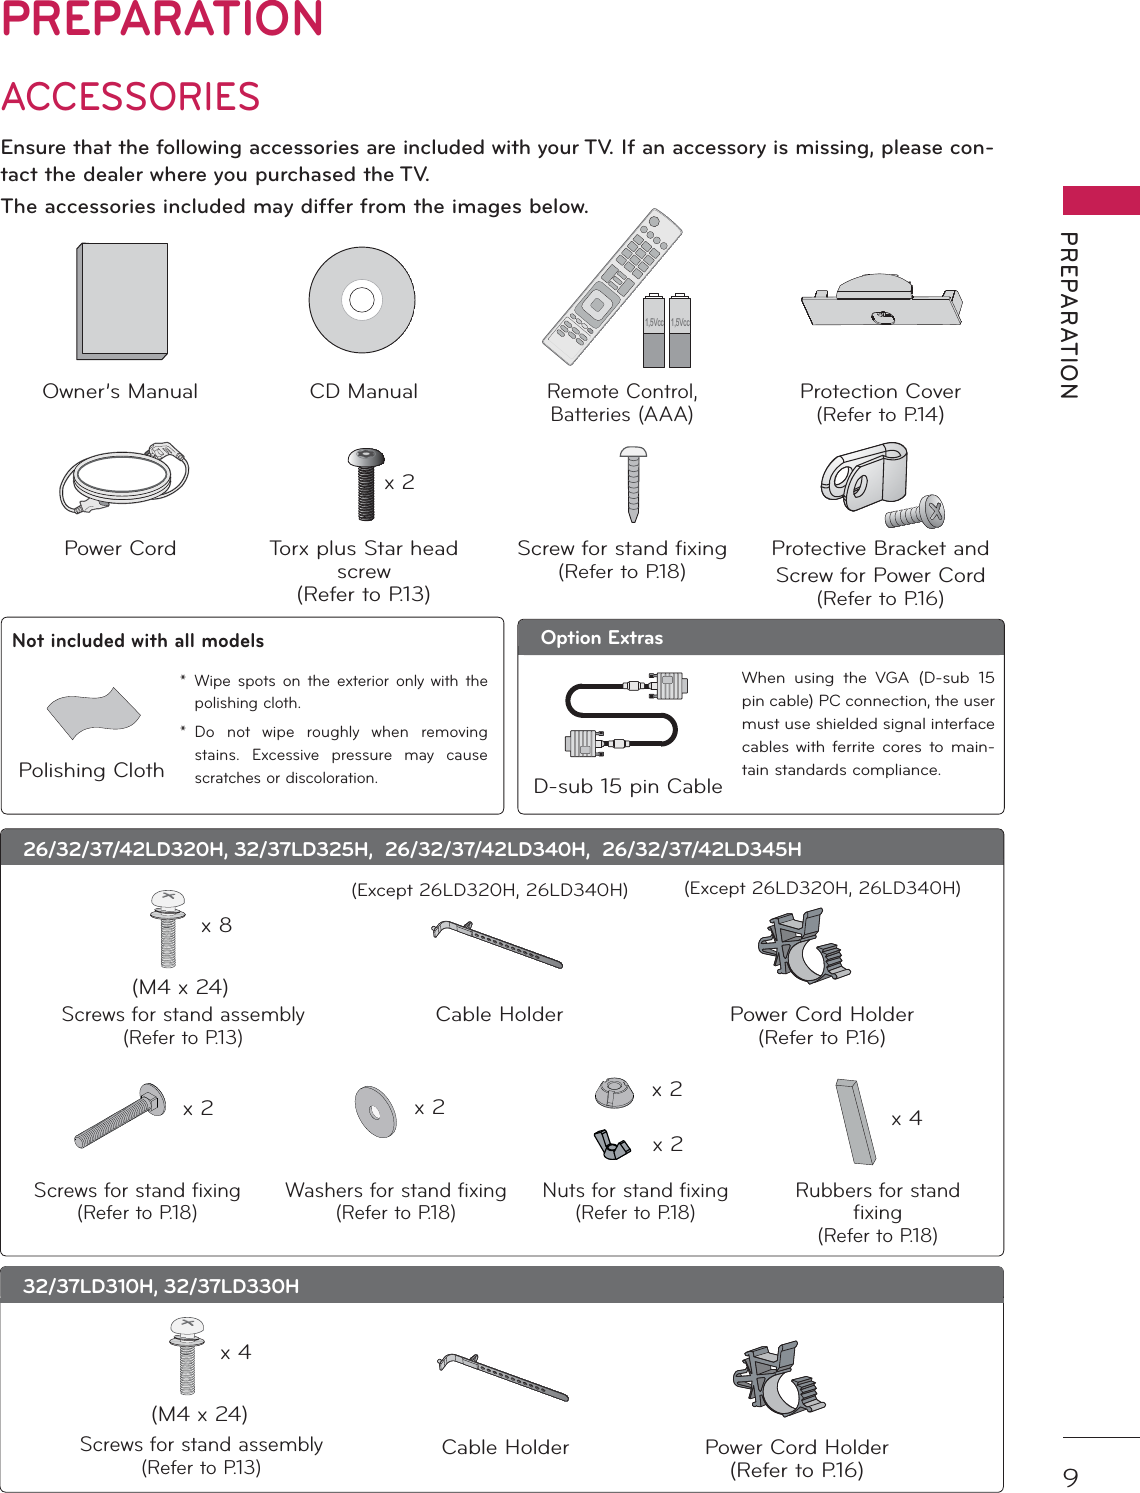 9PREPARATIONPREPARATIONACCESSORIESEnsure that the following accessories are included with your TV. If an accessory is missing, please con-tact the dealer where you purchased the TV. The accessories included may differ from the images below.Owner’s Manual CD ManualRemote Control,Batteries (AAA)Protection Cover(Refer to P.14)Power Cord Torx plus Star head screw(Refer to P.13)Screw for stand fixing(Refer to P.18)Protective Bracket and Screw for Power Cord(Refer to P.16)26/32/37/42LD320H, 32/37LD325H,  26/32/37/42LD340H,  26/32/37/42LD345HCable HolderScrews for stand assembly(Refer to P.13)x 8(M4 x 24)32/37LD310H, 32/37LD330H1,5Vcc 1,5Vccx 2(Except 26LD320H, 26LD340H)Screws for stand assembly(Refer to P.13)x 4(M4 x 24)Power Cord Holder(Refer to P.16)(Except 26LD320H, 26LD340H)Screws for stand fixing(Refer to P.18)x 2Washers for stand fixing(Refer to P.18)x 2Nuts for stand fixing(Refer to P.18)x 2x 2Rubbers for standfixing(Refer to P.18)x 4Option Extras* Wipe spots on the exterior only with the polishing cloth.* Do not wipe roughly when removing stains. Excessive pressure may cause scratches or discoloration.Polishing ClothNot included with all modelsD-sub 15 pin CableWhen using the VGA (D-sub 15 pin cable) PC connection, the user must use shielded signal interface cables with ferrite cores to main-tain standards compliance.Cable Holder Power Cord Holder(Refer to P.16)